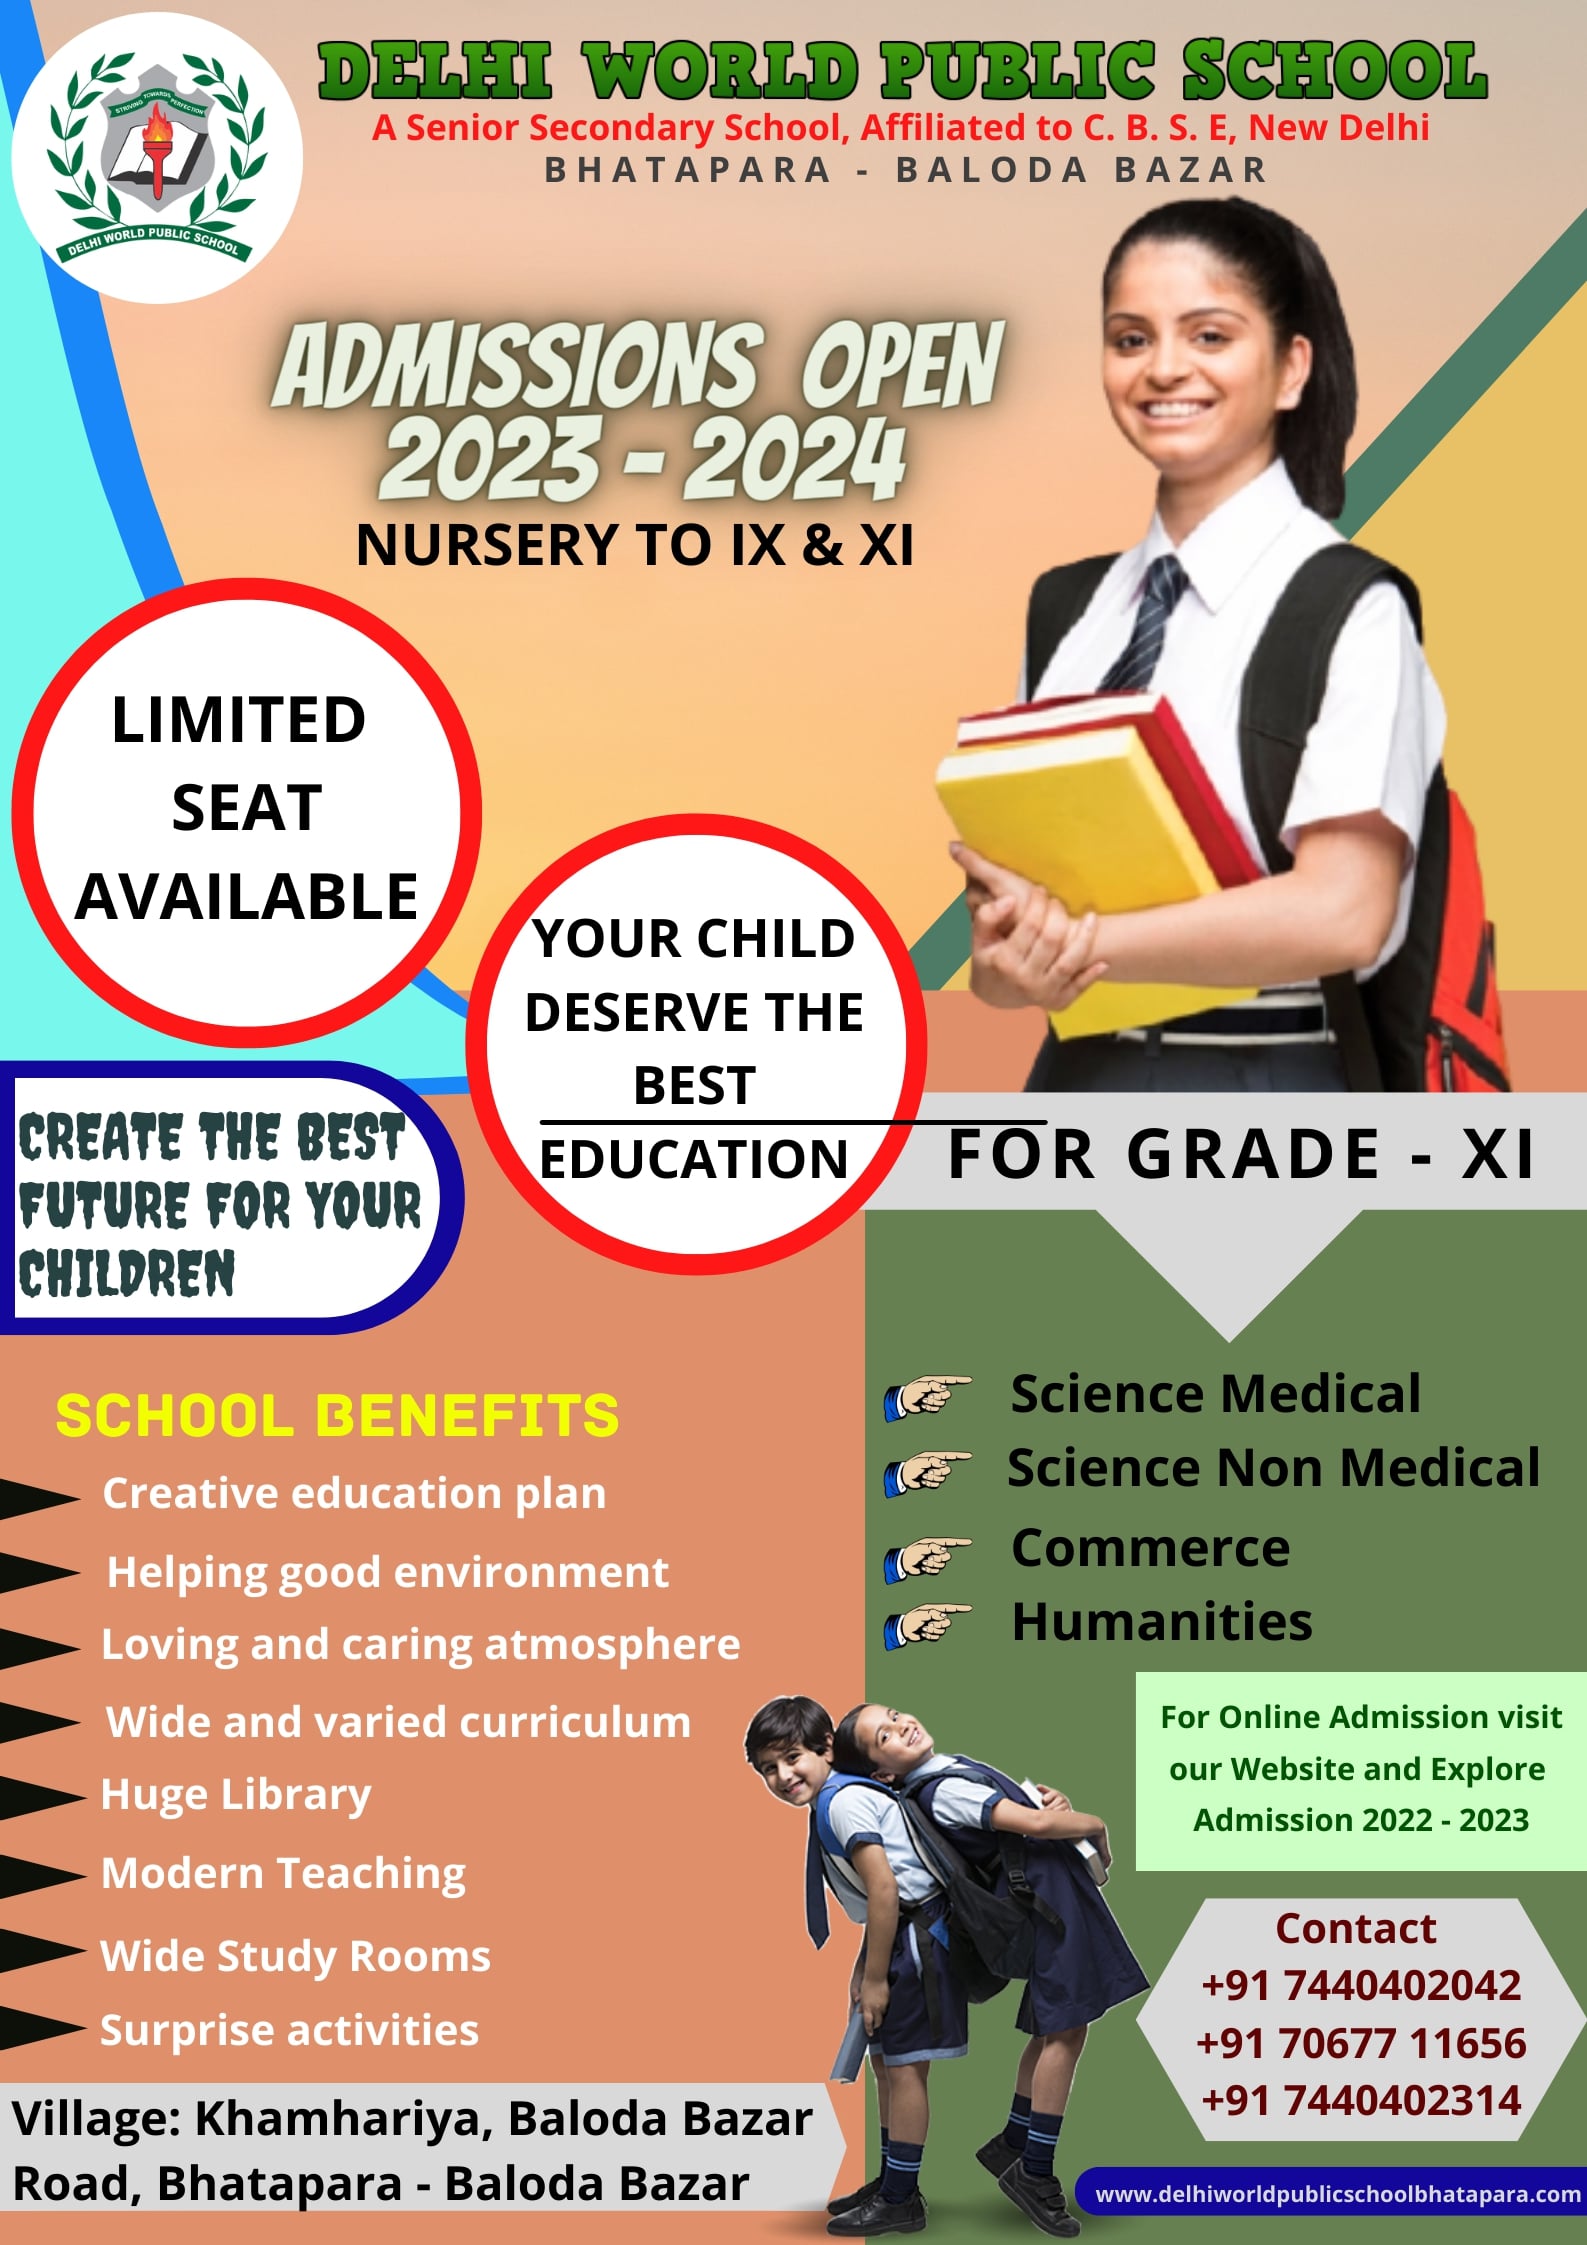 Admission Open For 2023-24 at DWPS Bhatapara 